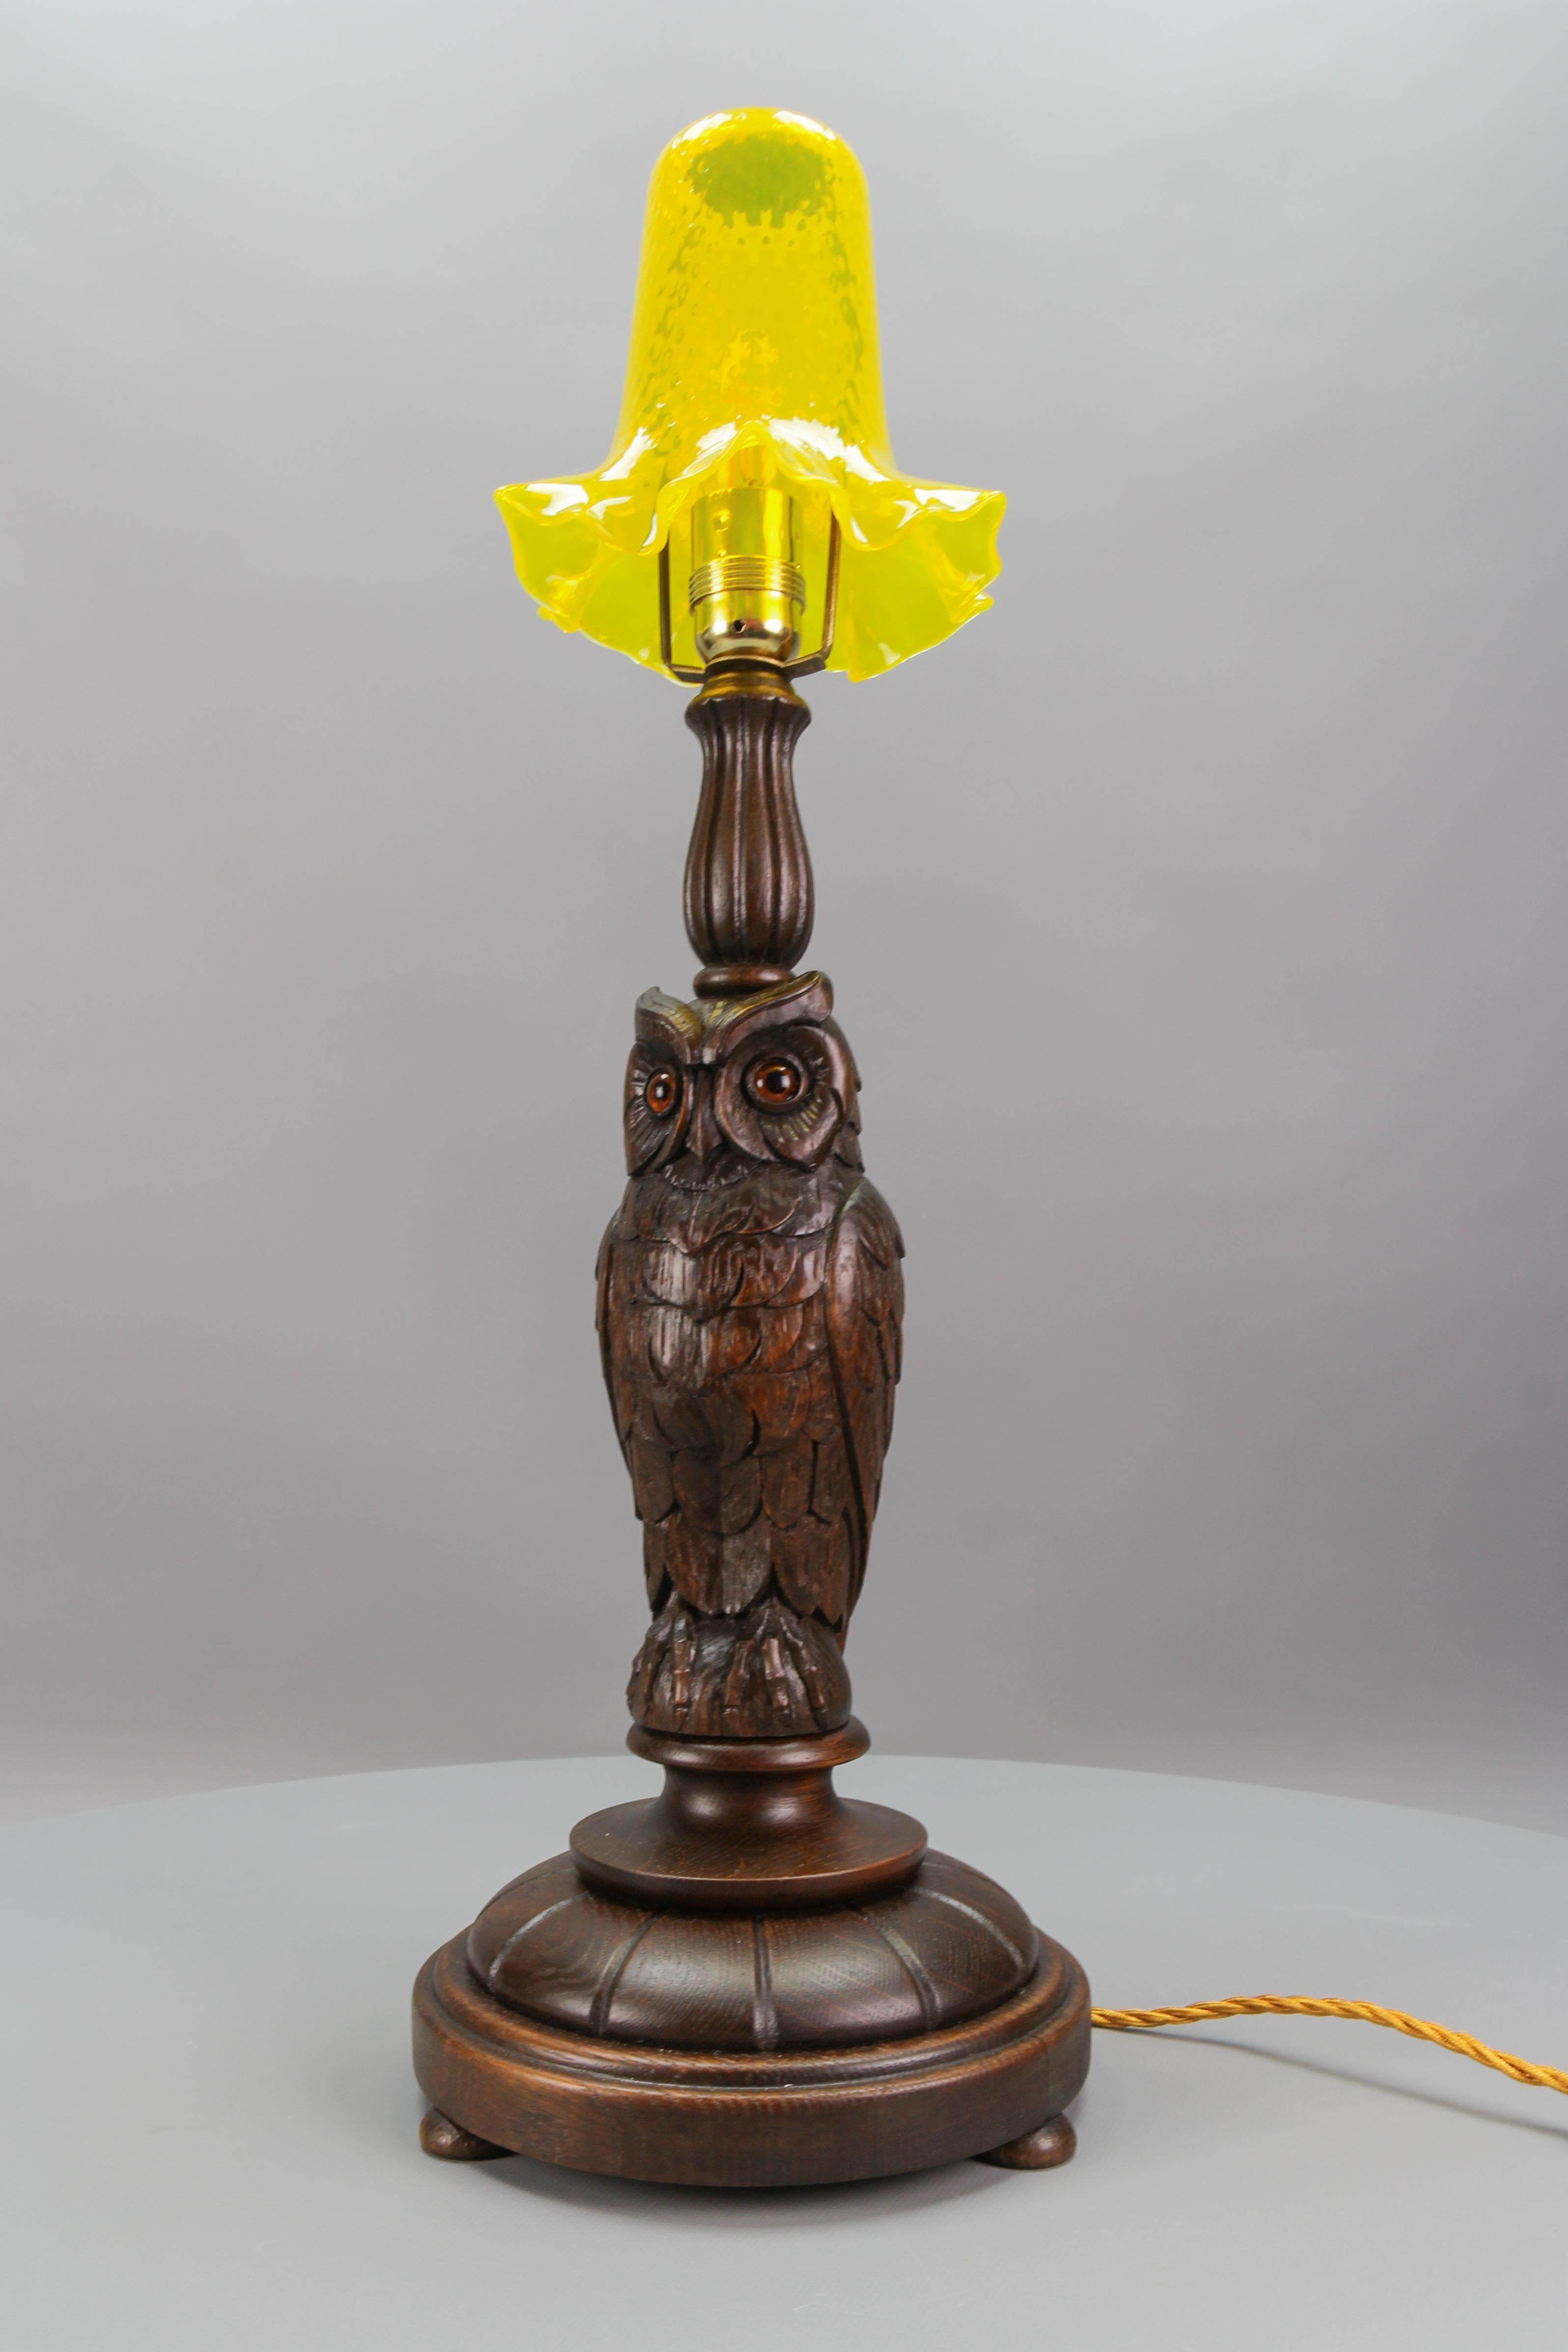 Antique Art Deco table or desk lamp with owl sculpture and yellow glass lampshade, Germany, ca. 1920
This antique Art Deco period table lamp or desk lamp base is a stunning piece made of hand-carved oakwood in the shape of an owl with glass eyes.